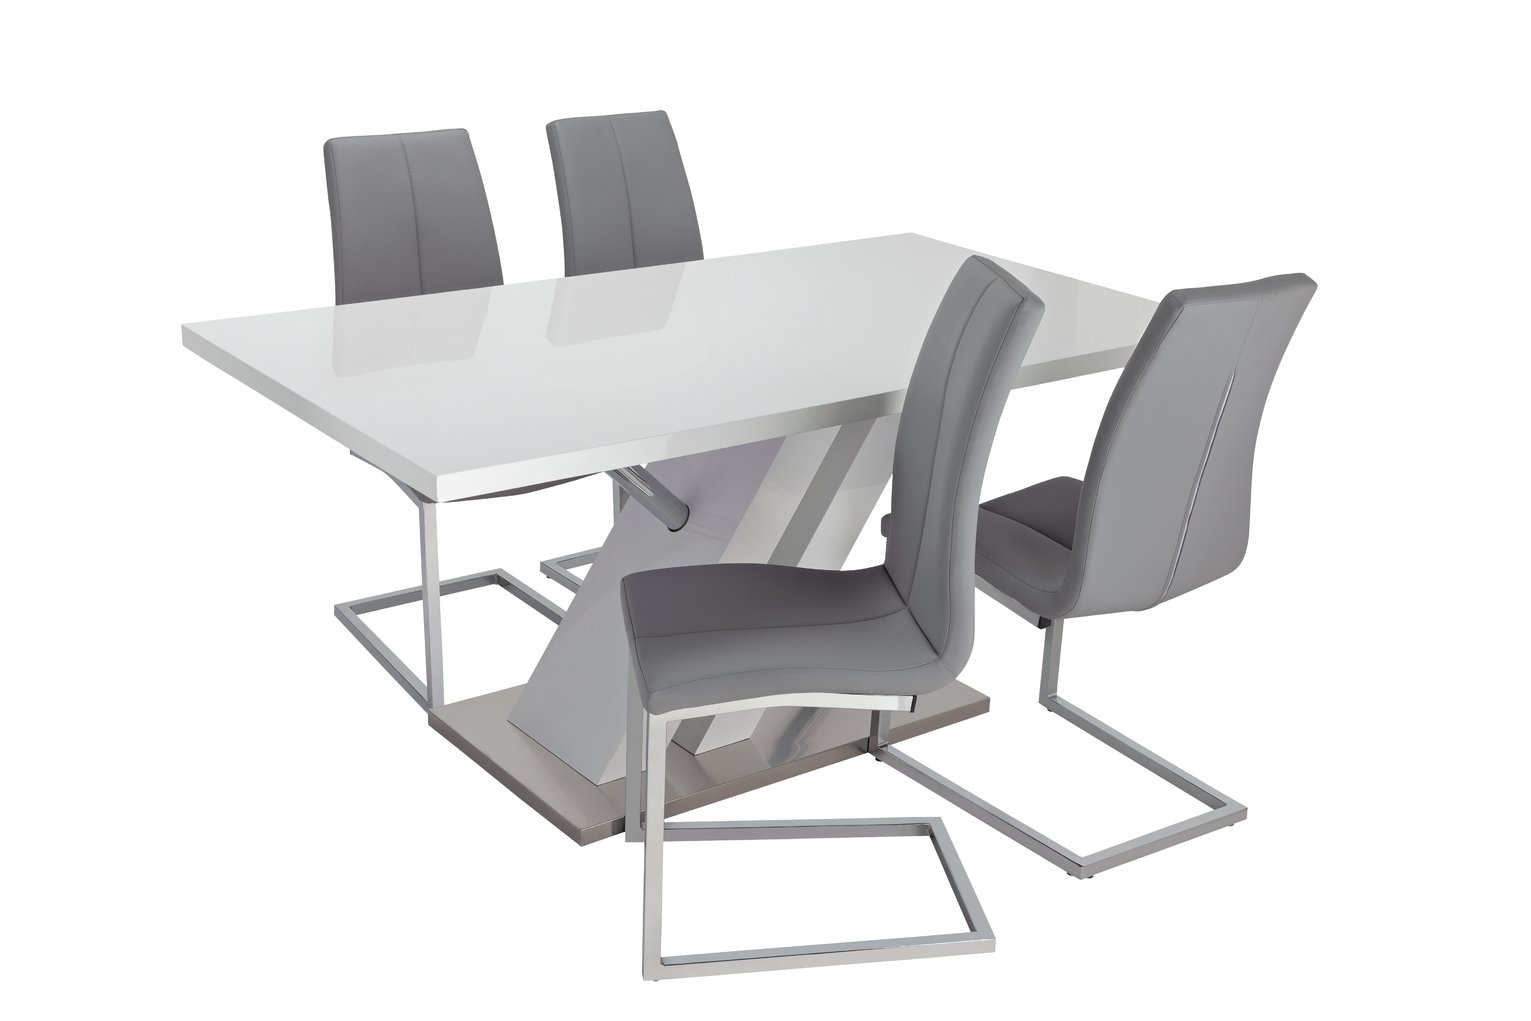 Argos Home Belvoir Gloss Dining Table & 4 Milo Chairs - Grey